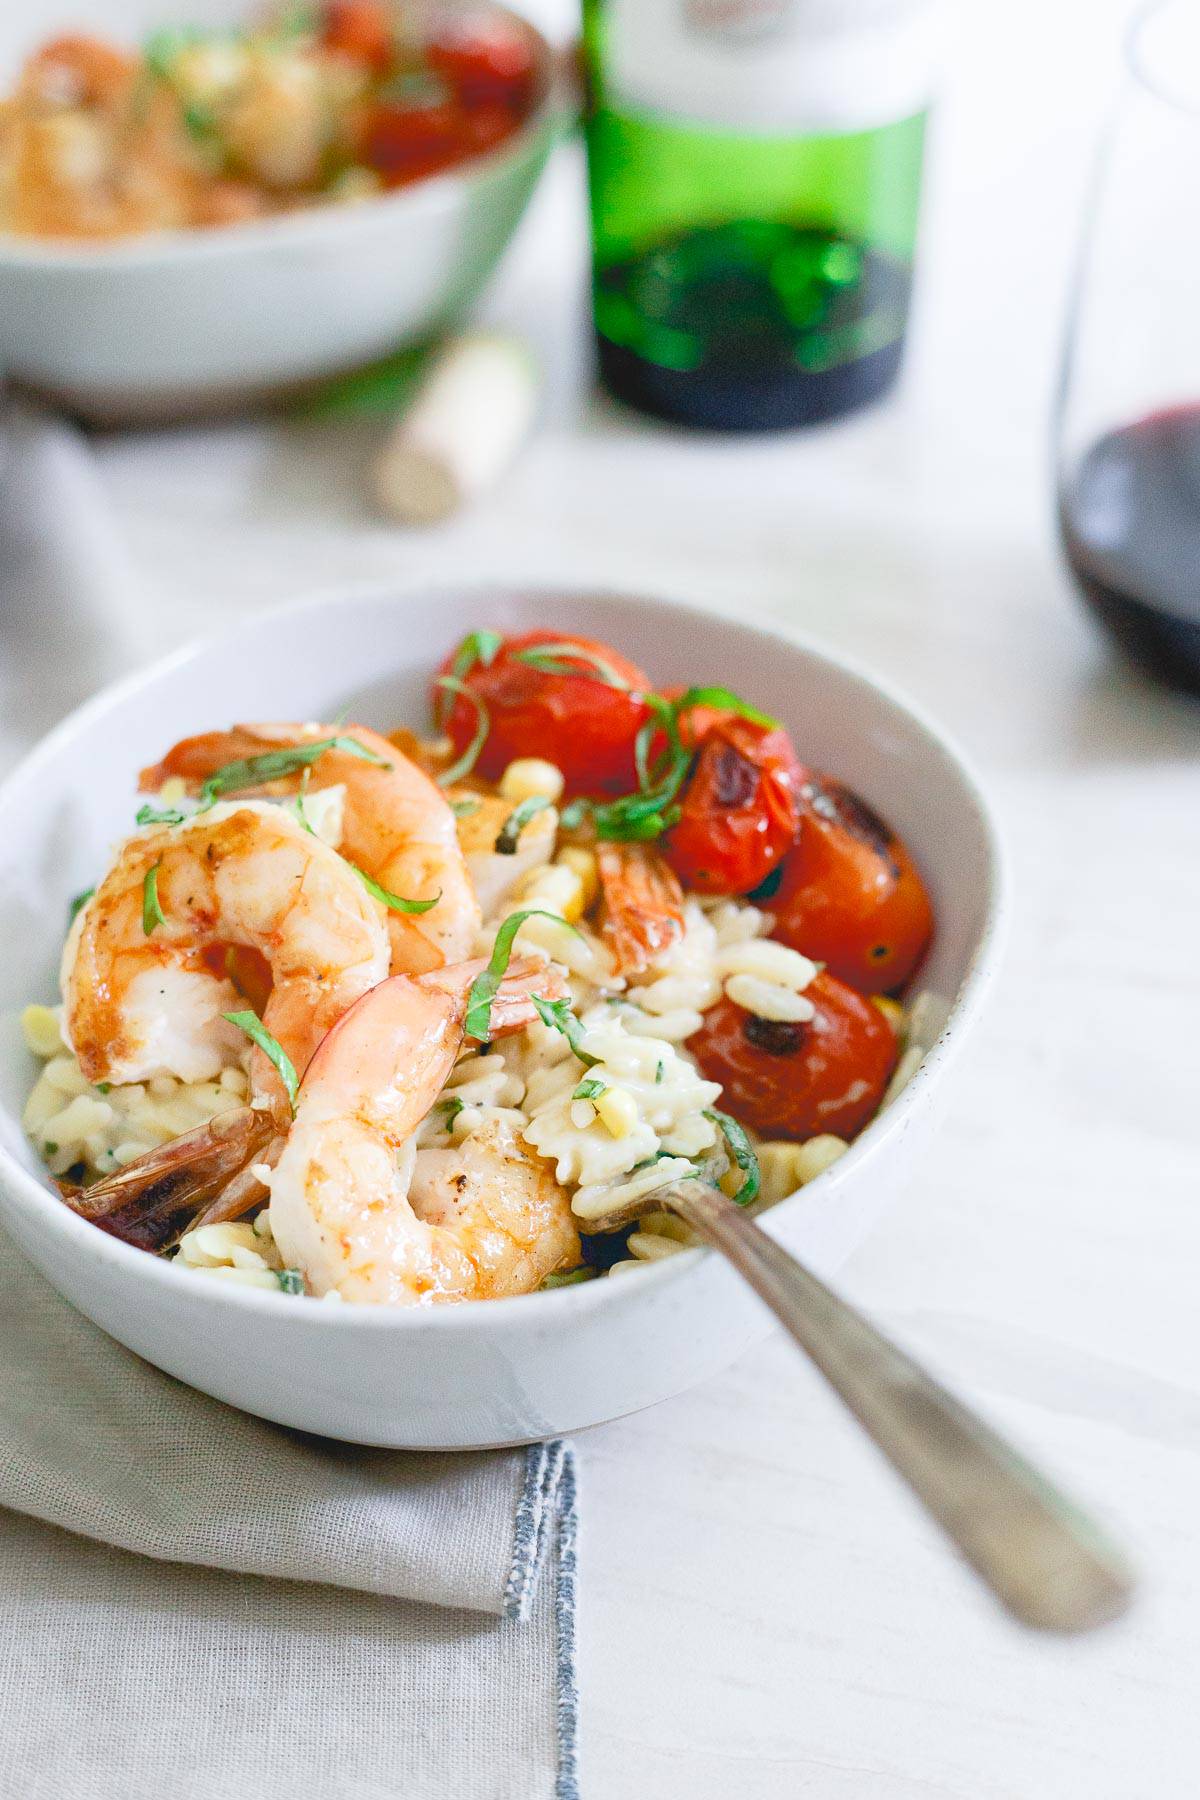 This elegant summer meal of brown butter shrimp with creamy parmesan orzo is perfect for a date night in.